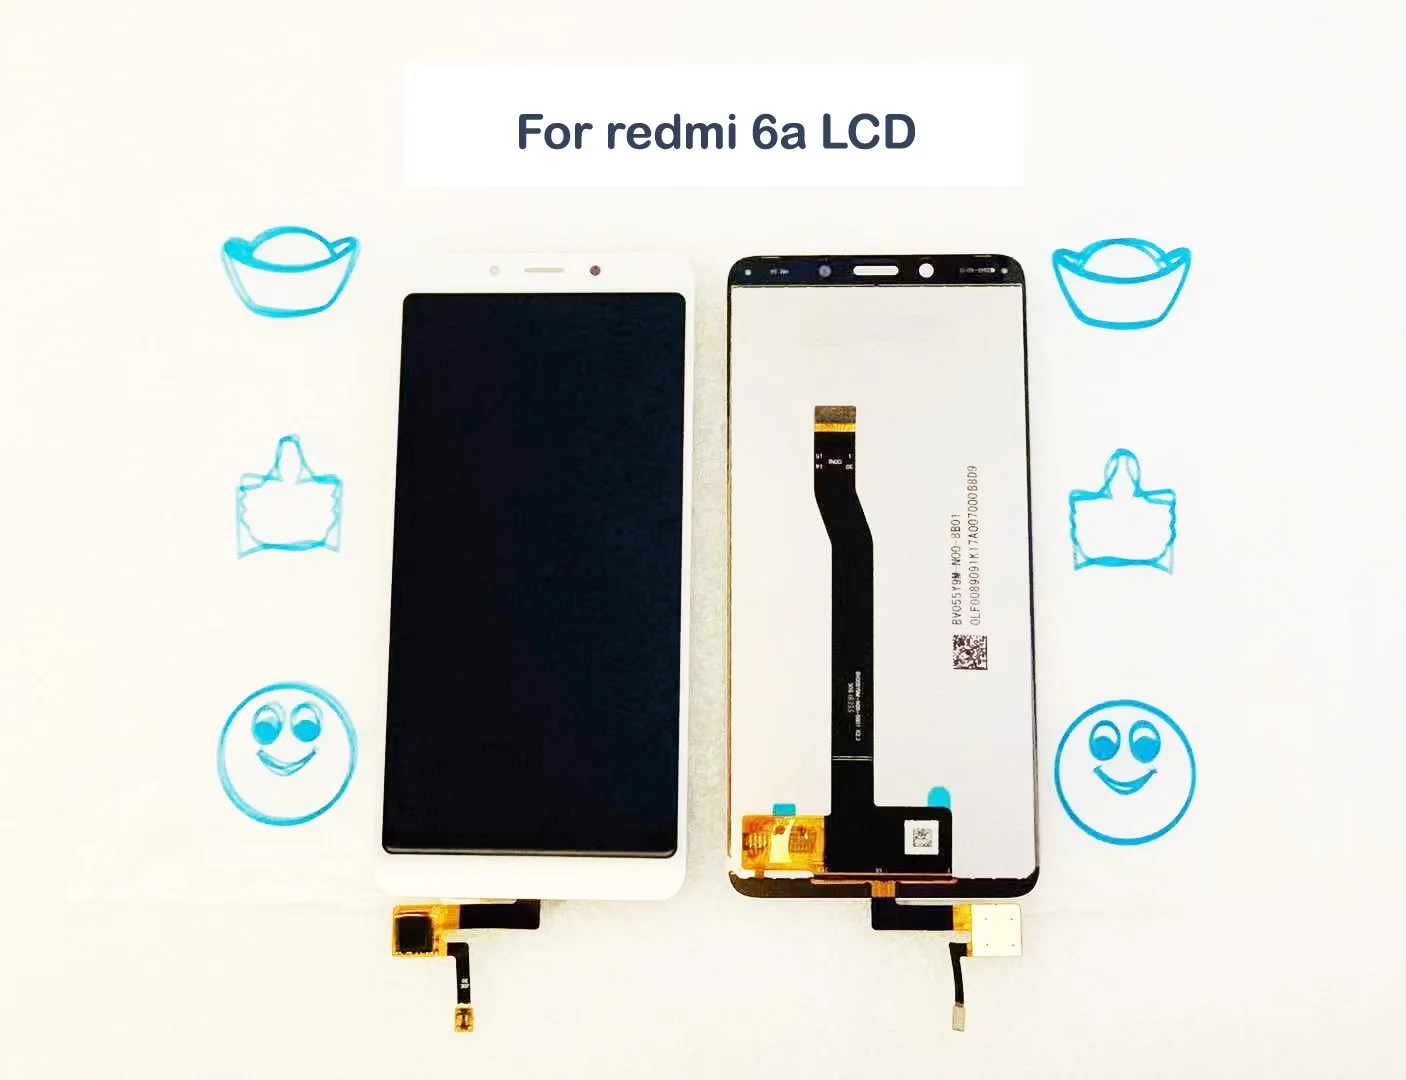 Mobile Phone Spare Parts For Xiaomi For Redmi 6 Lcd Display Touch Screen Digitizer Complete For Redmi 6a Lcd Buy For Redmi 6a Lcd Mobile Phone Spare Parts For Xiaomi I For Redmi